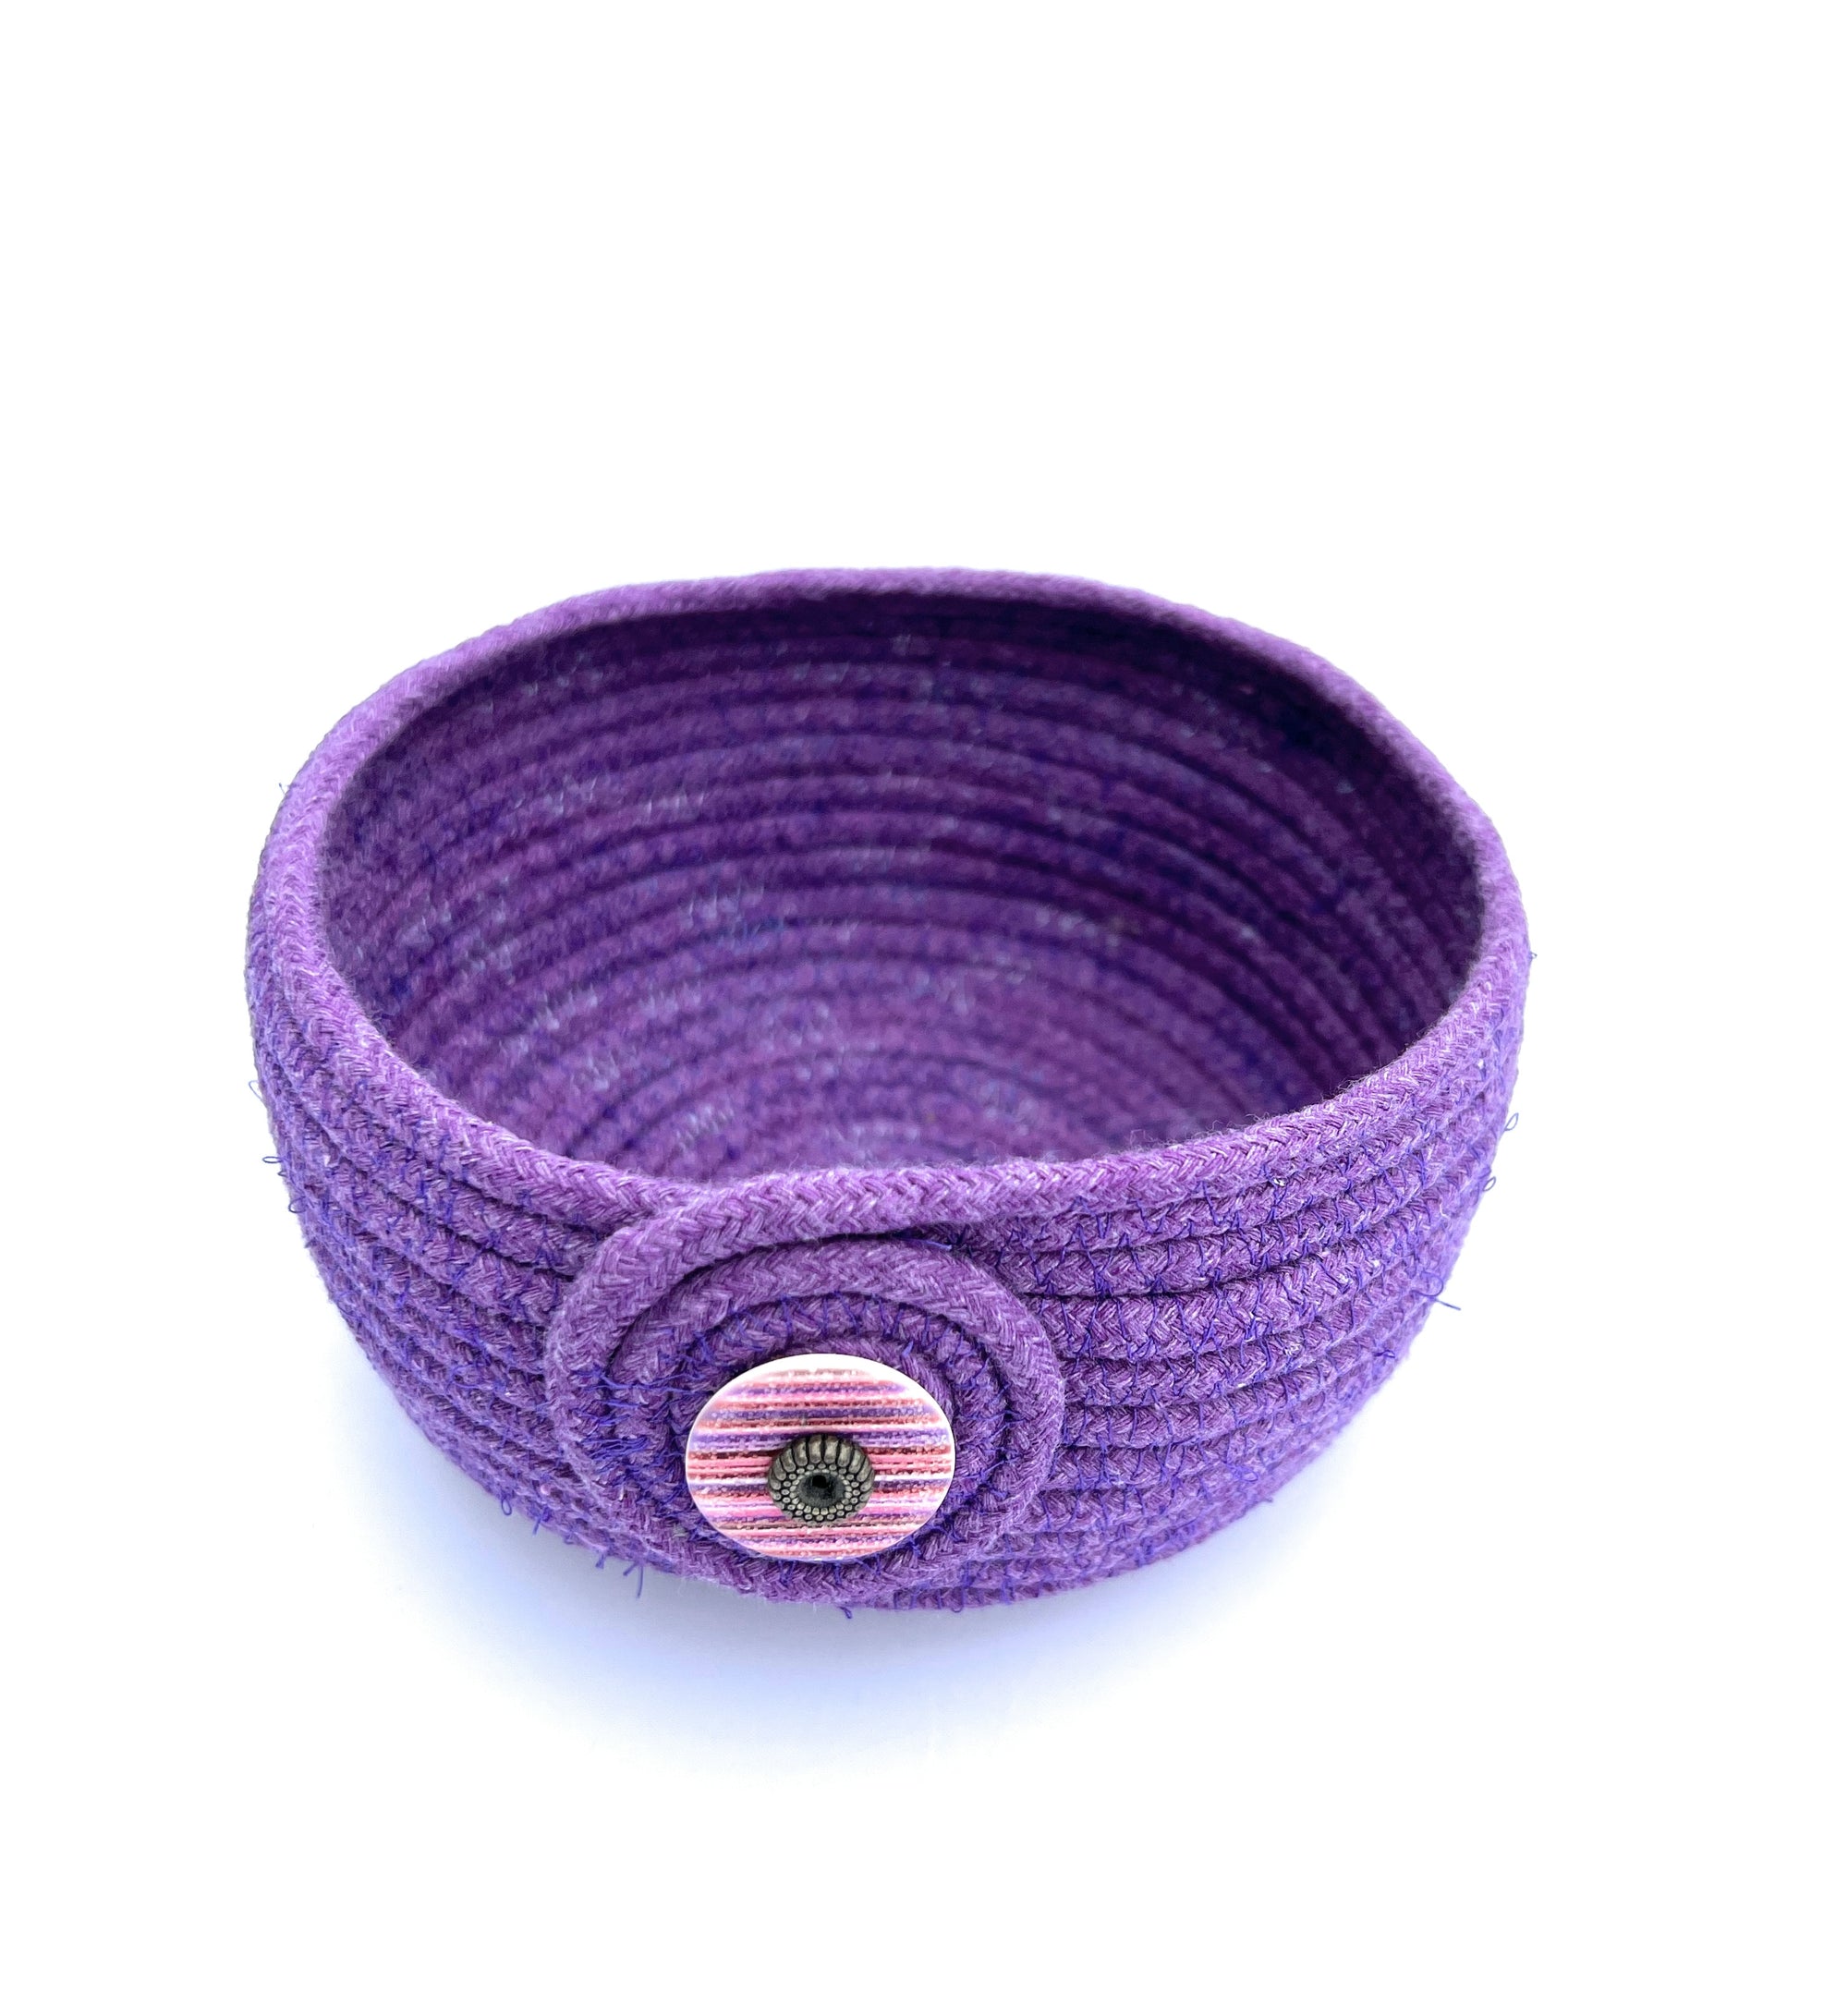 Coiled Rope Bowl in Lavendar Purple